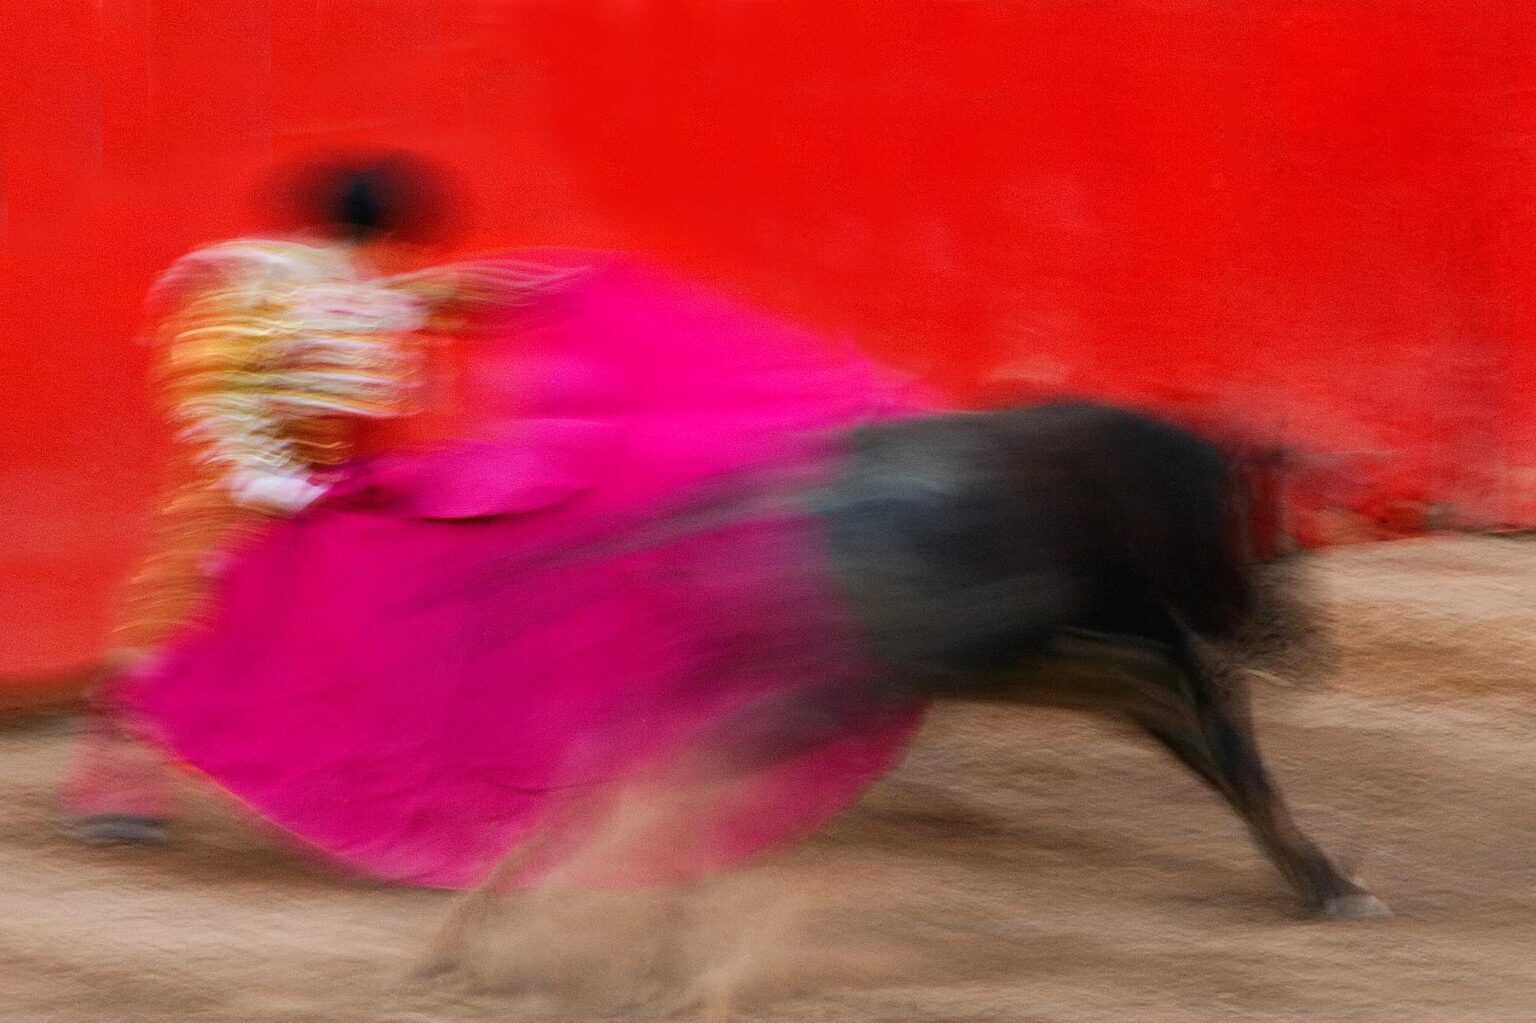 A MATADOR and bull are poetry in motion during a bull fight in the Plaza de Toros - SAN MIGUEL DE ALLENDE, MEXICO